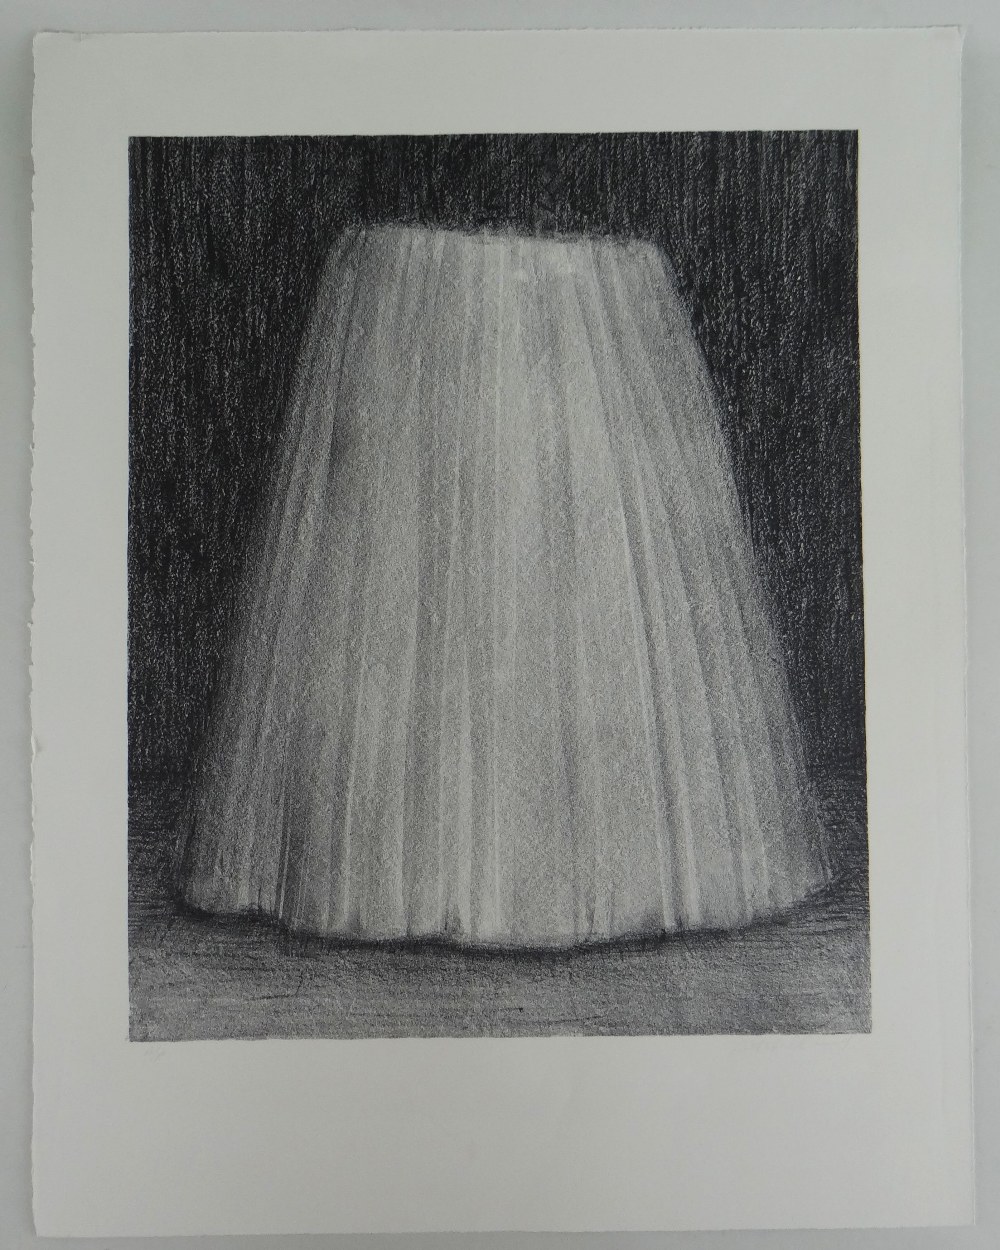 ‡ HARRY HOLLAND artist's proof monochrome print on paper - Image 2 of 2